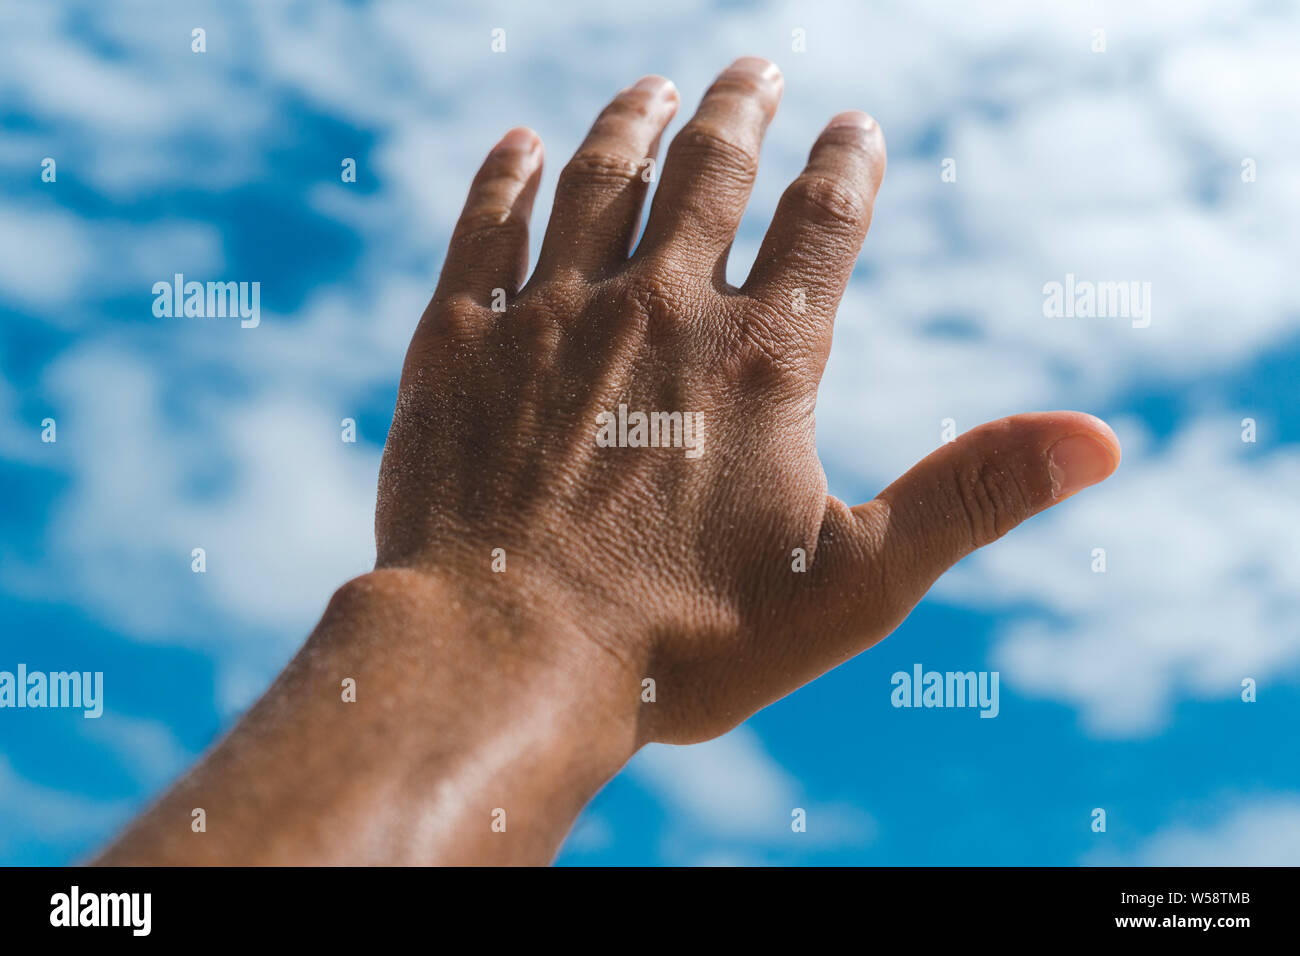 Sun tanned hand of hispanc male against blue sky with clouds Stock Photo